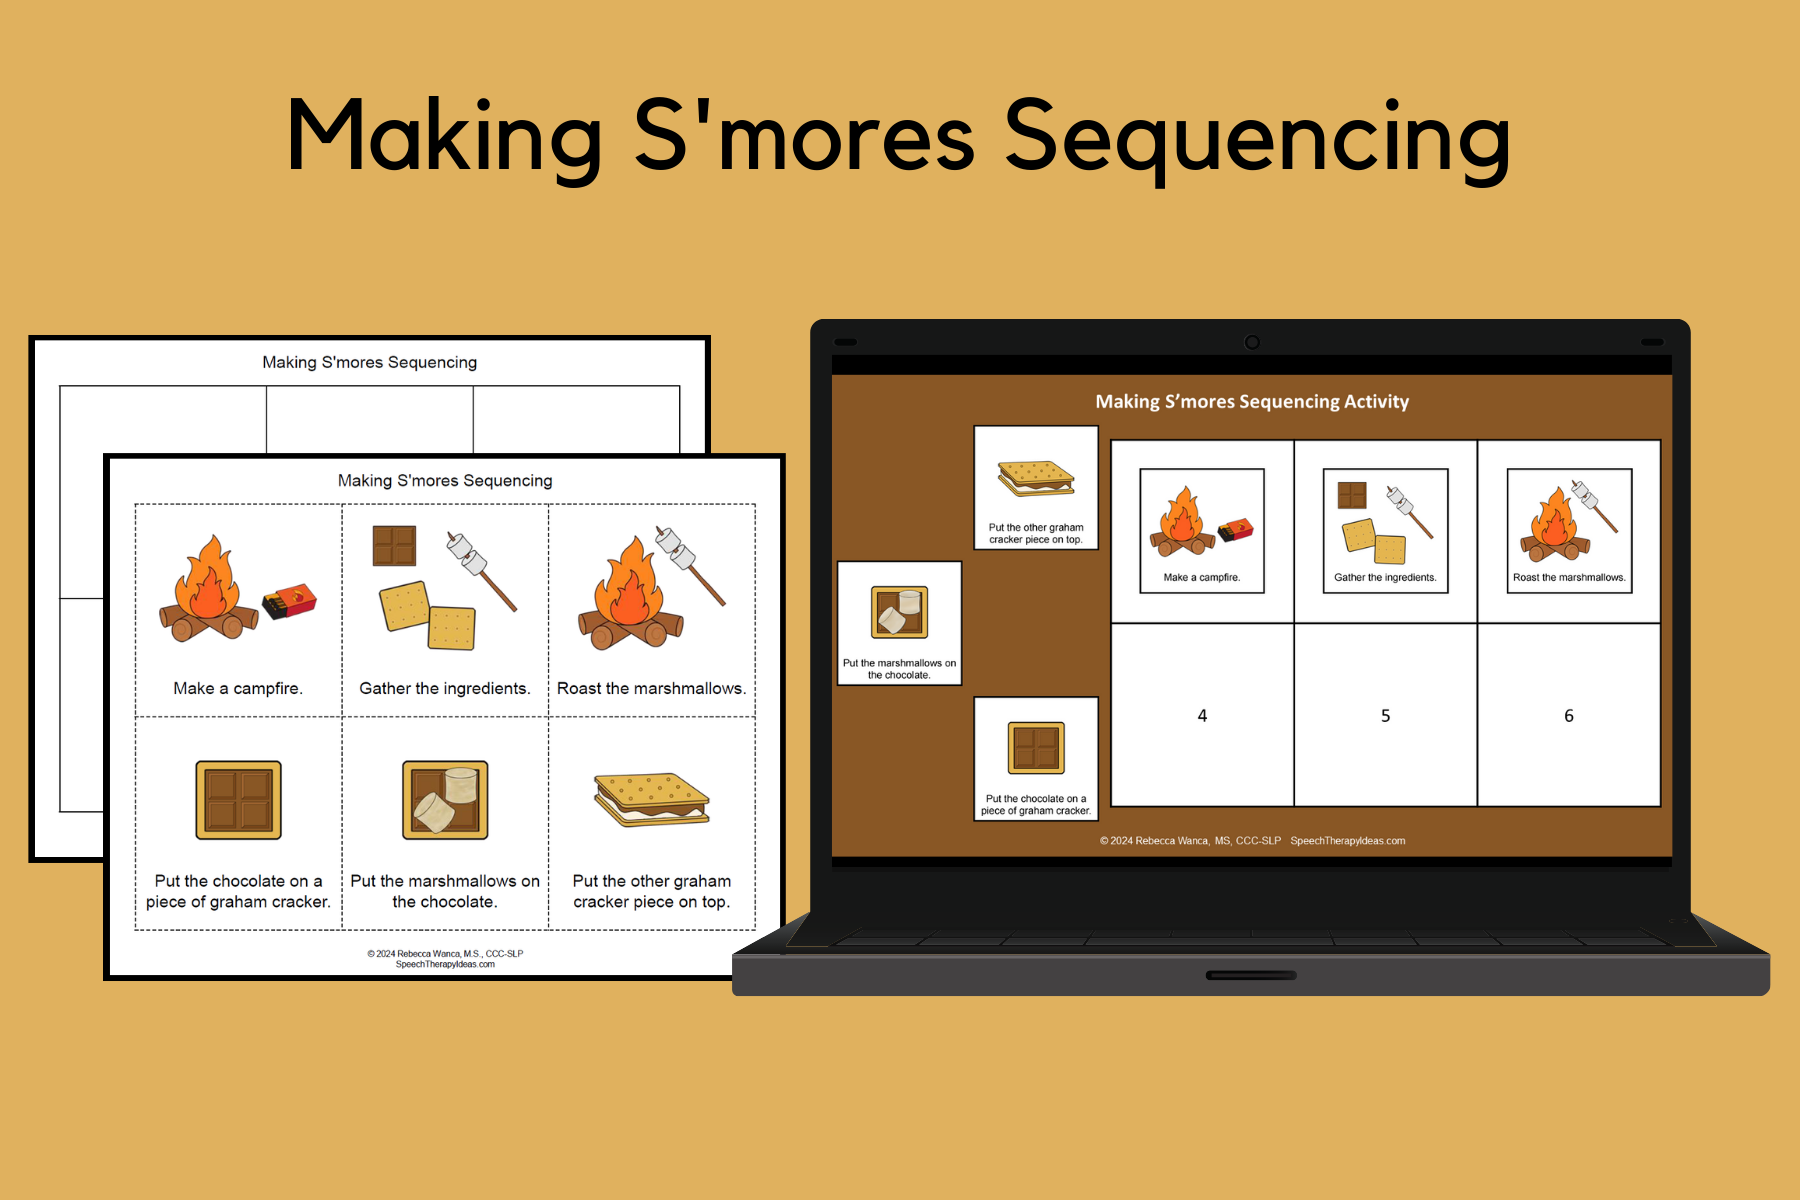 Making S’mores Sequencing Activity